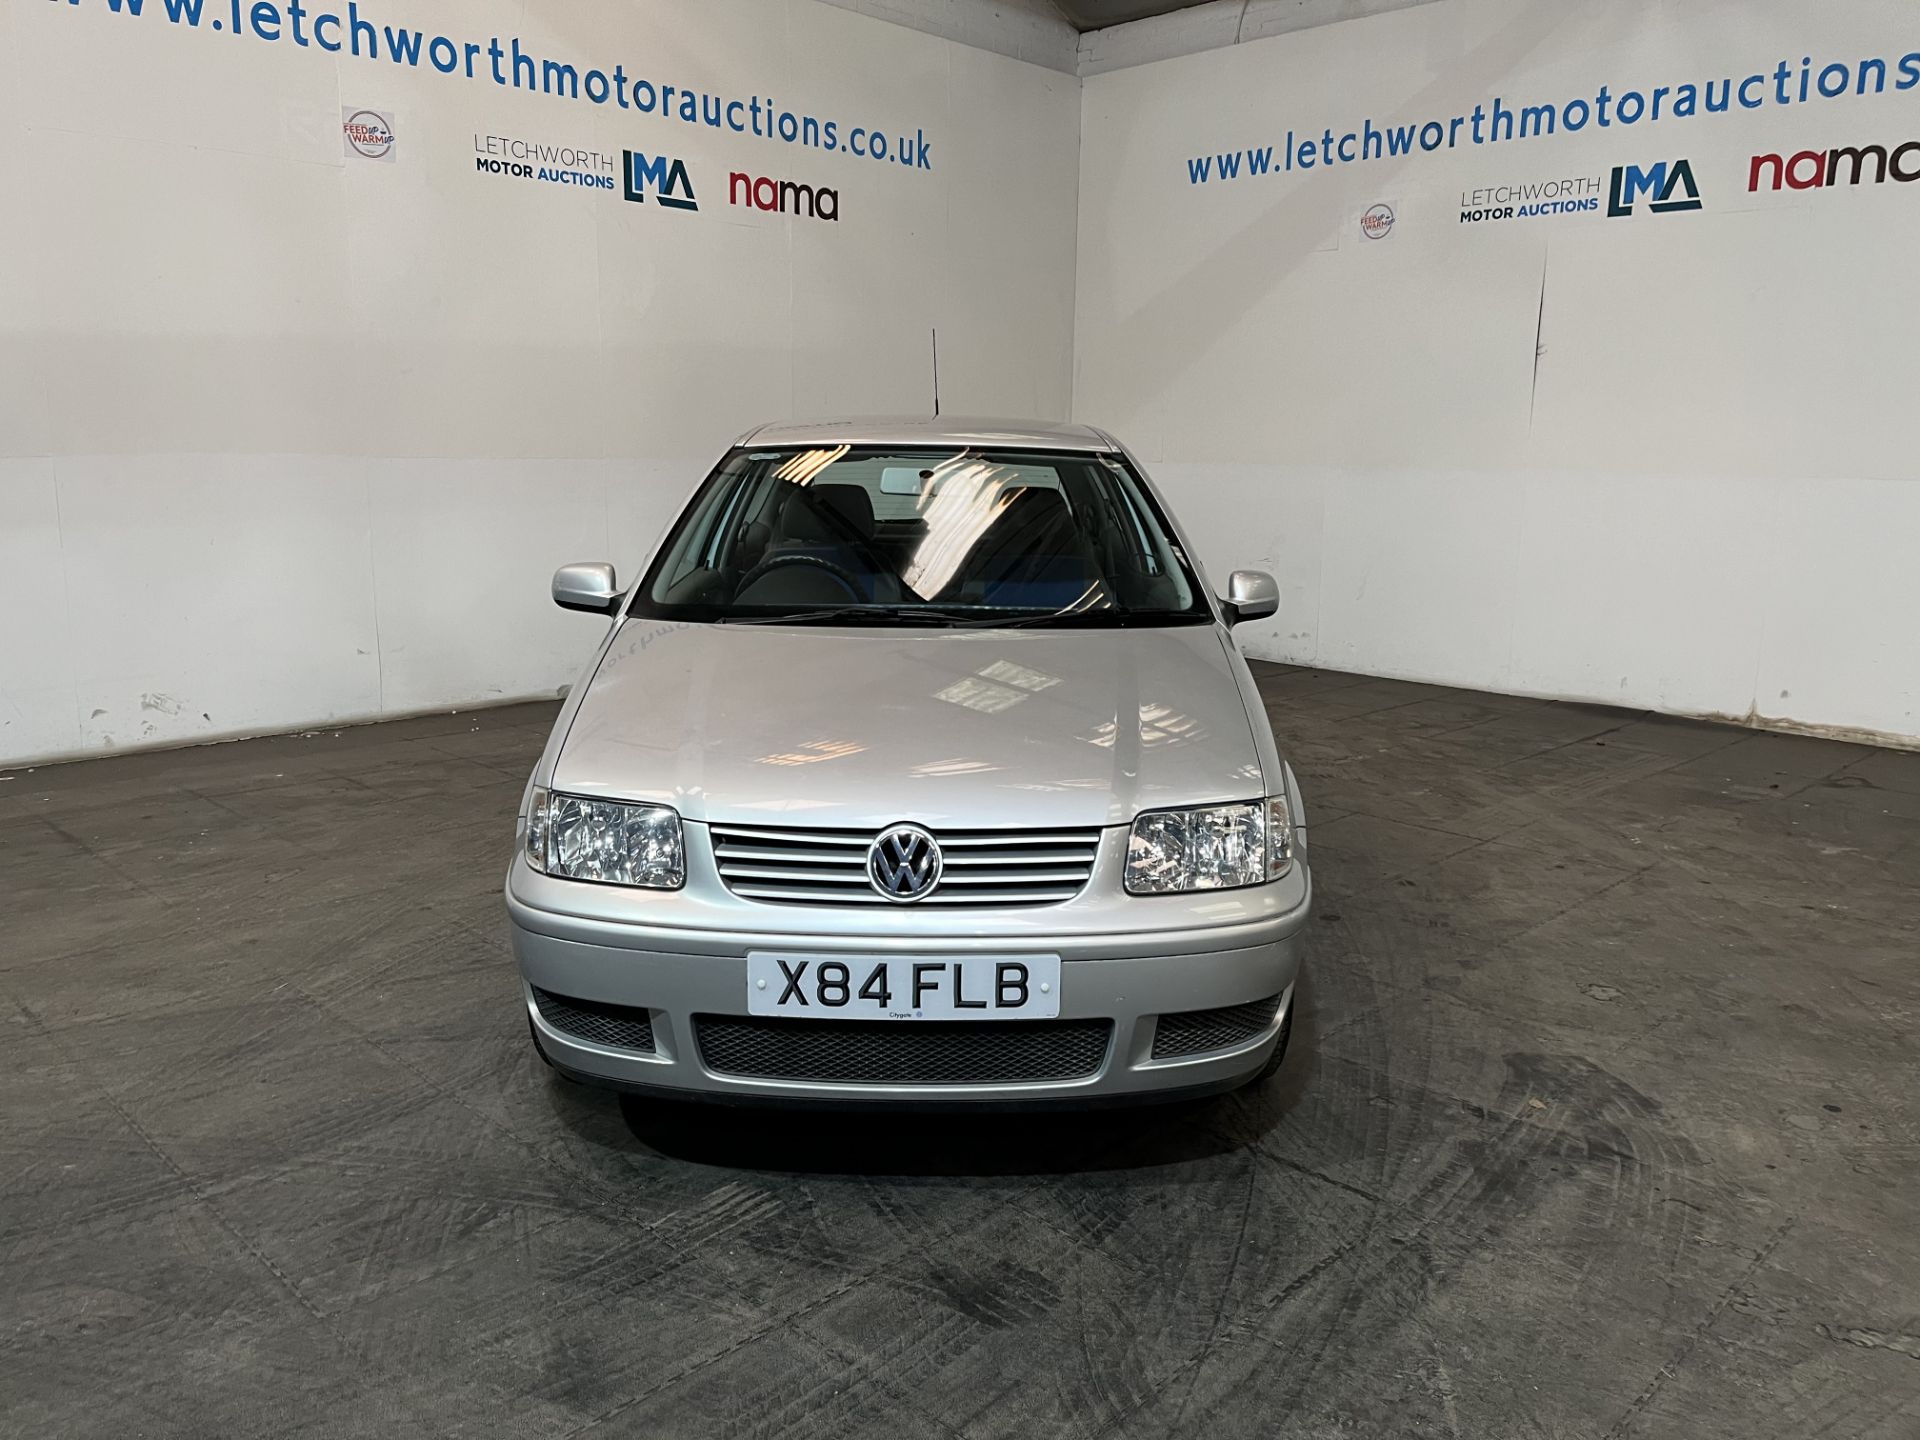 2000 Volkswagen Polo S - 1390cc - Image 2 of 16